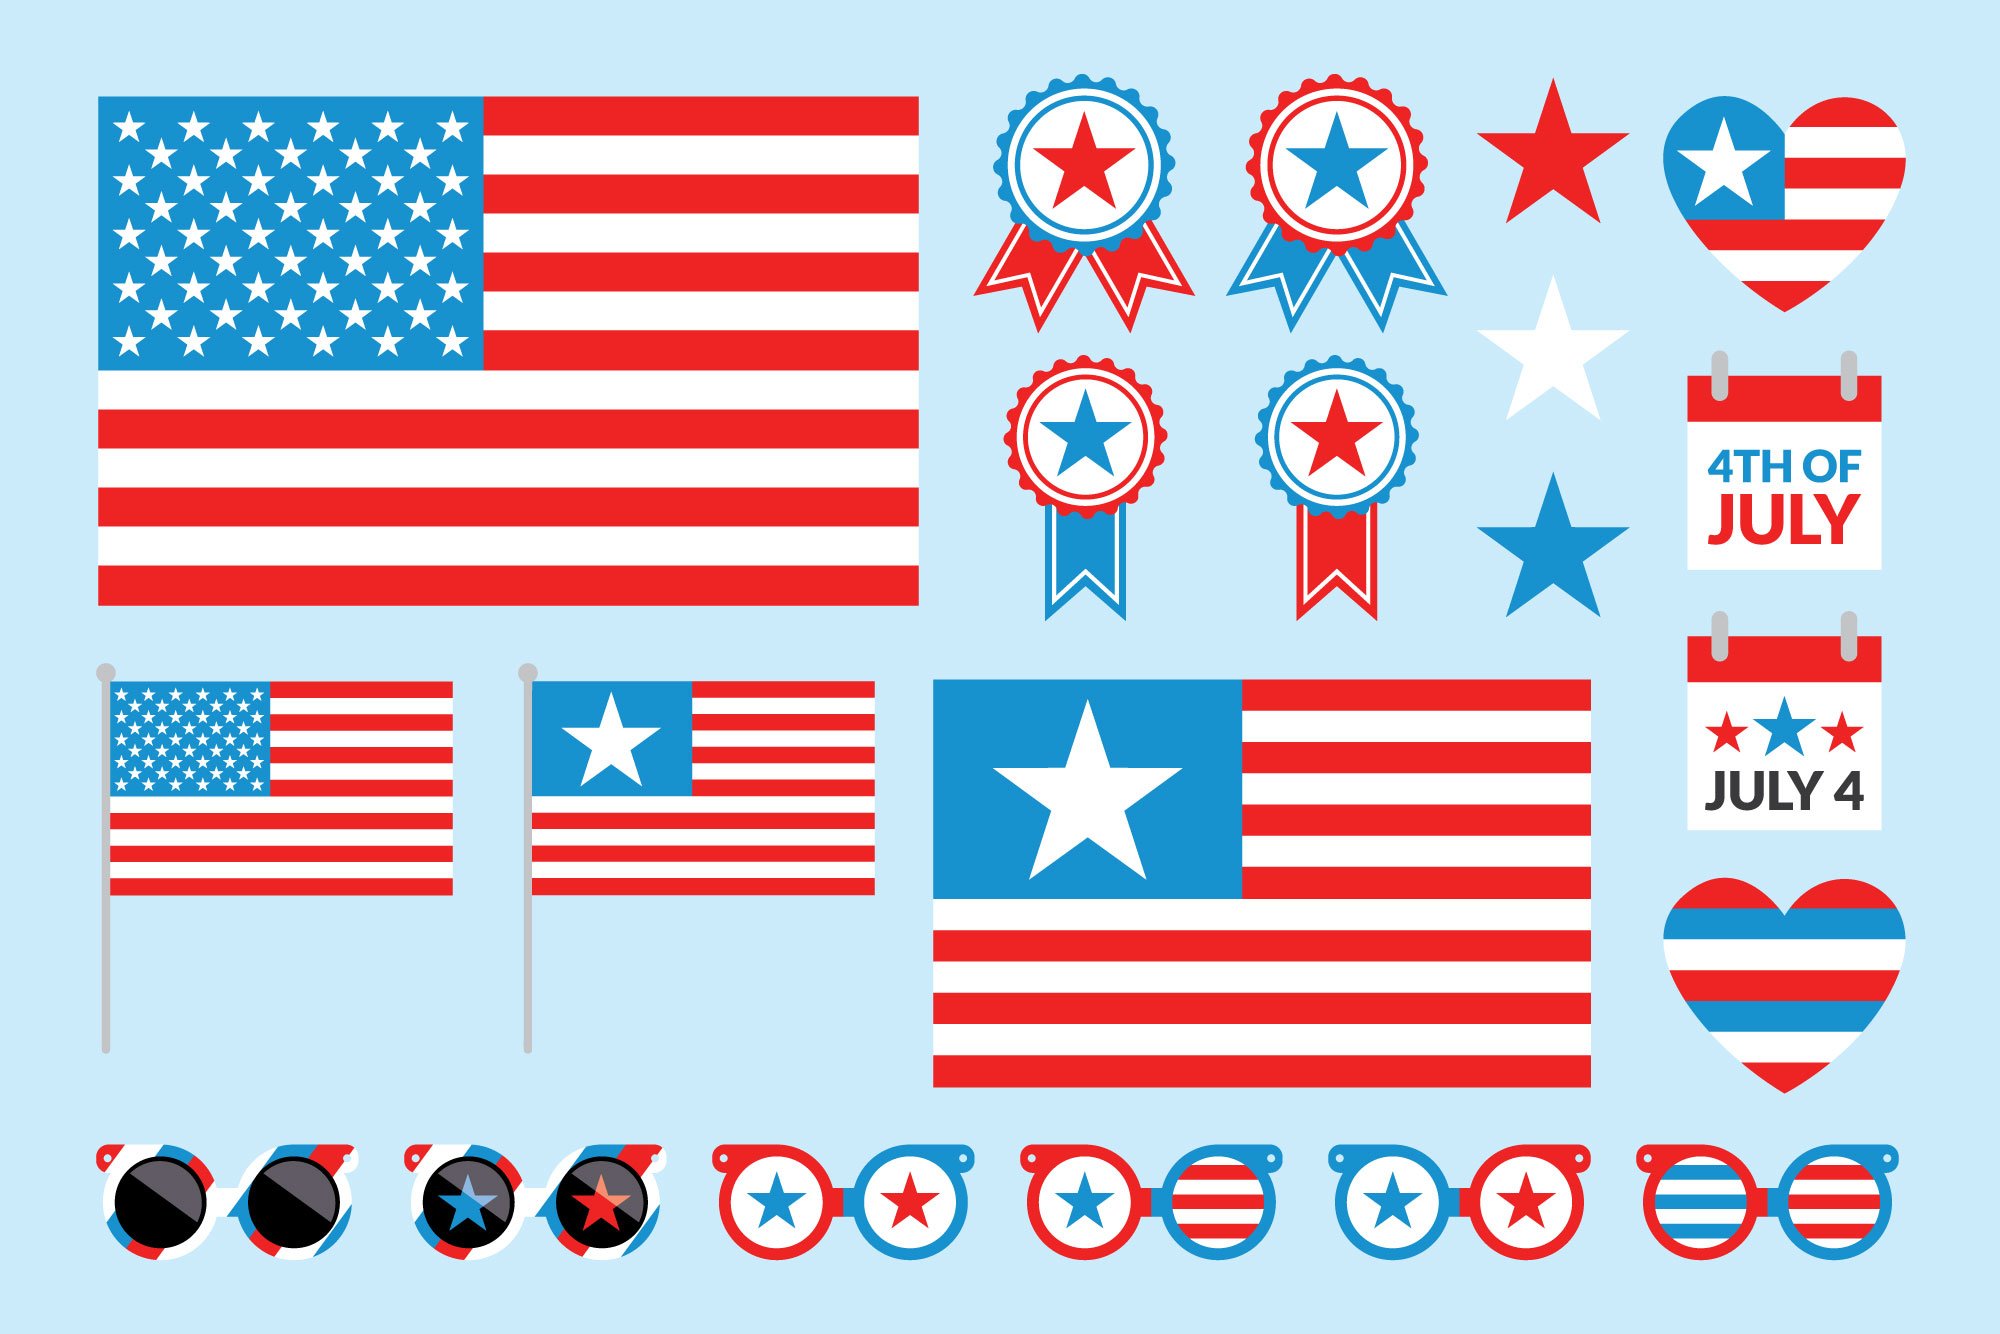 Light blue background with the so colorful USA elements.